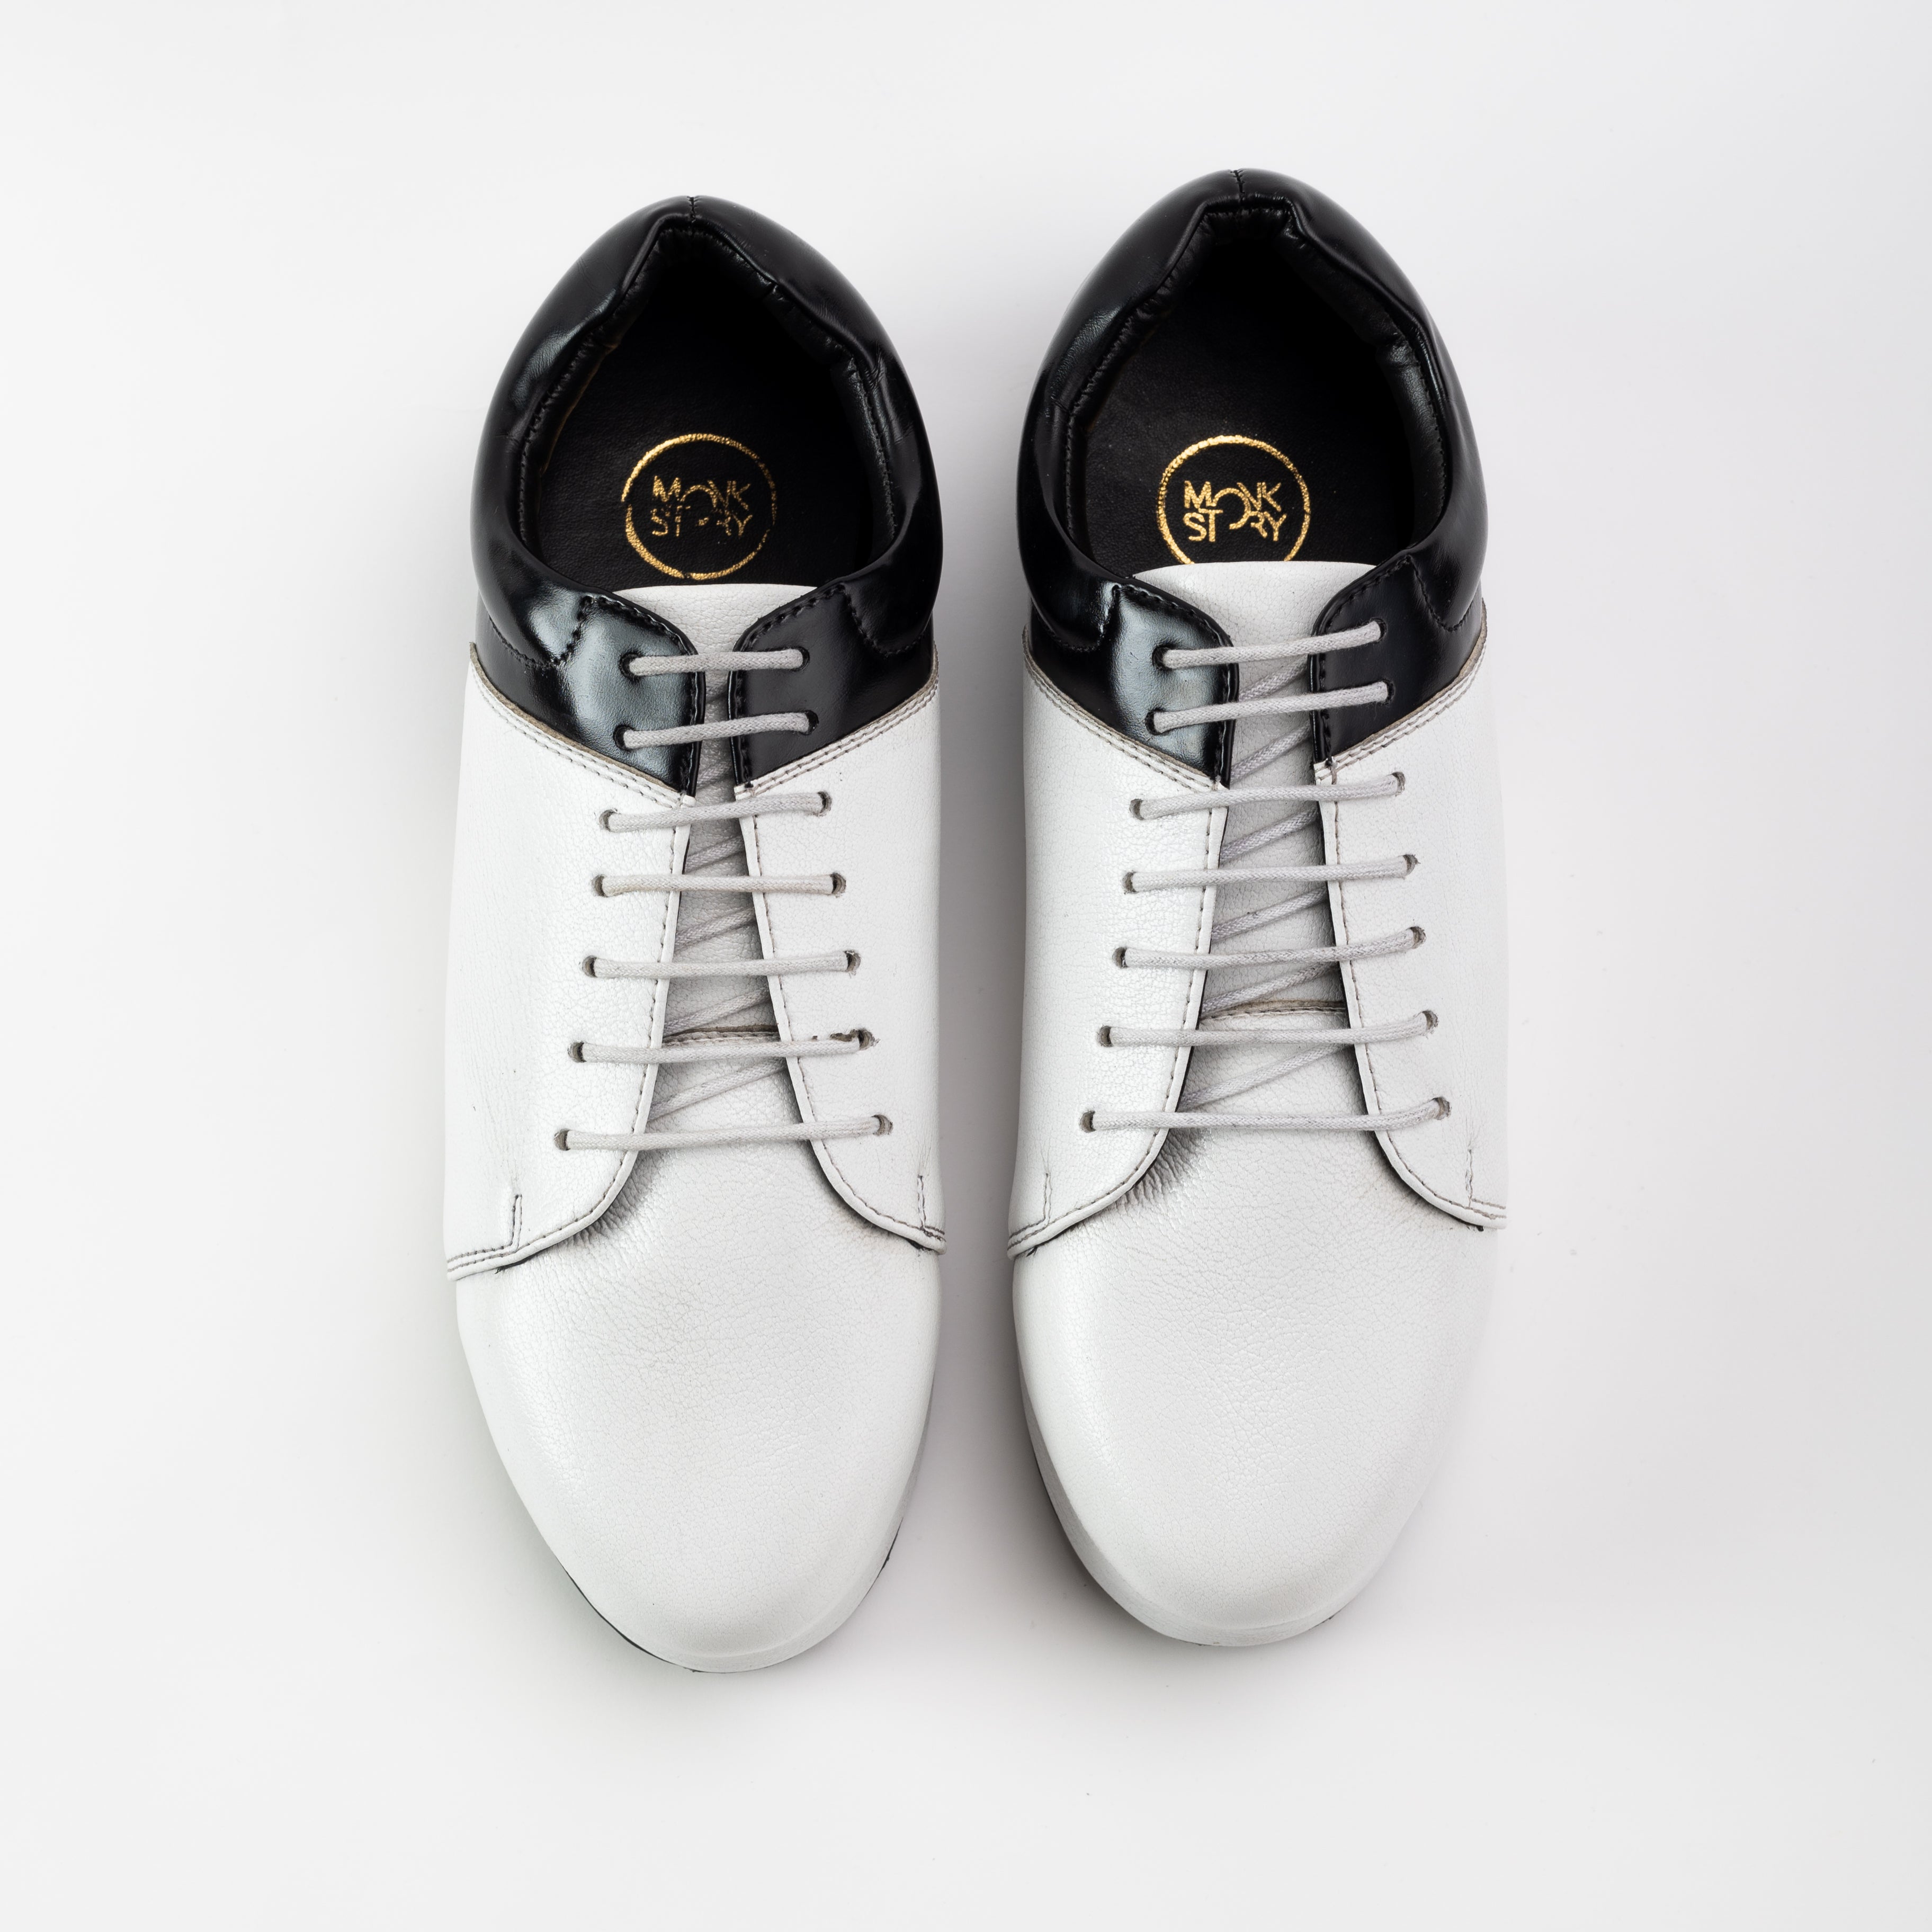 Offbeat Lace Vegan Sneakers - The Double Dare